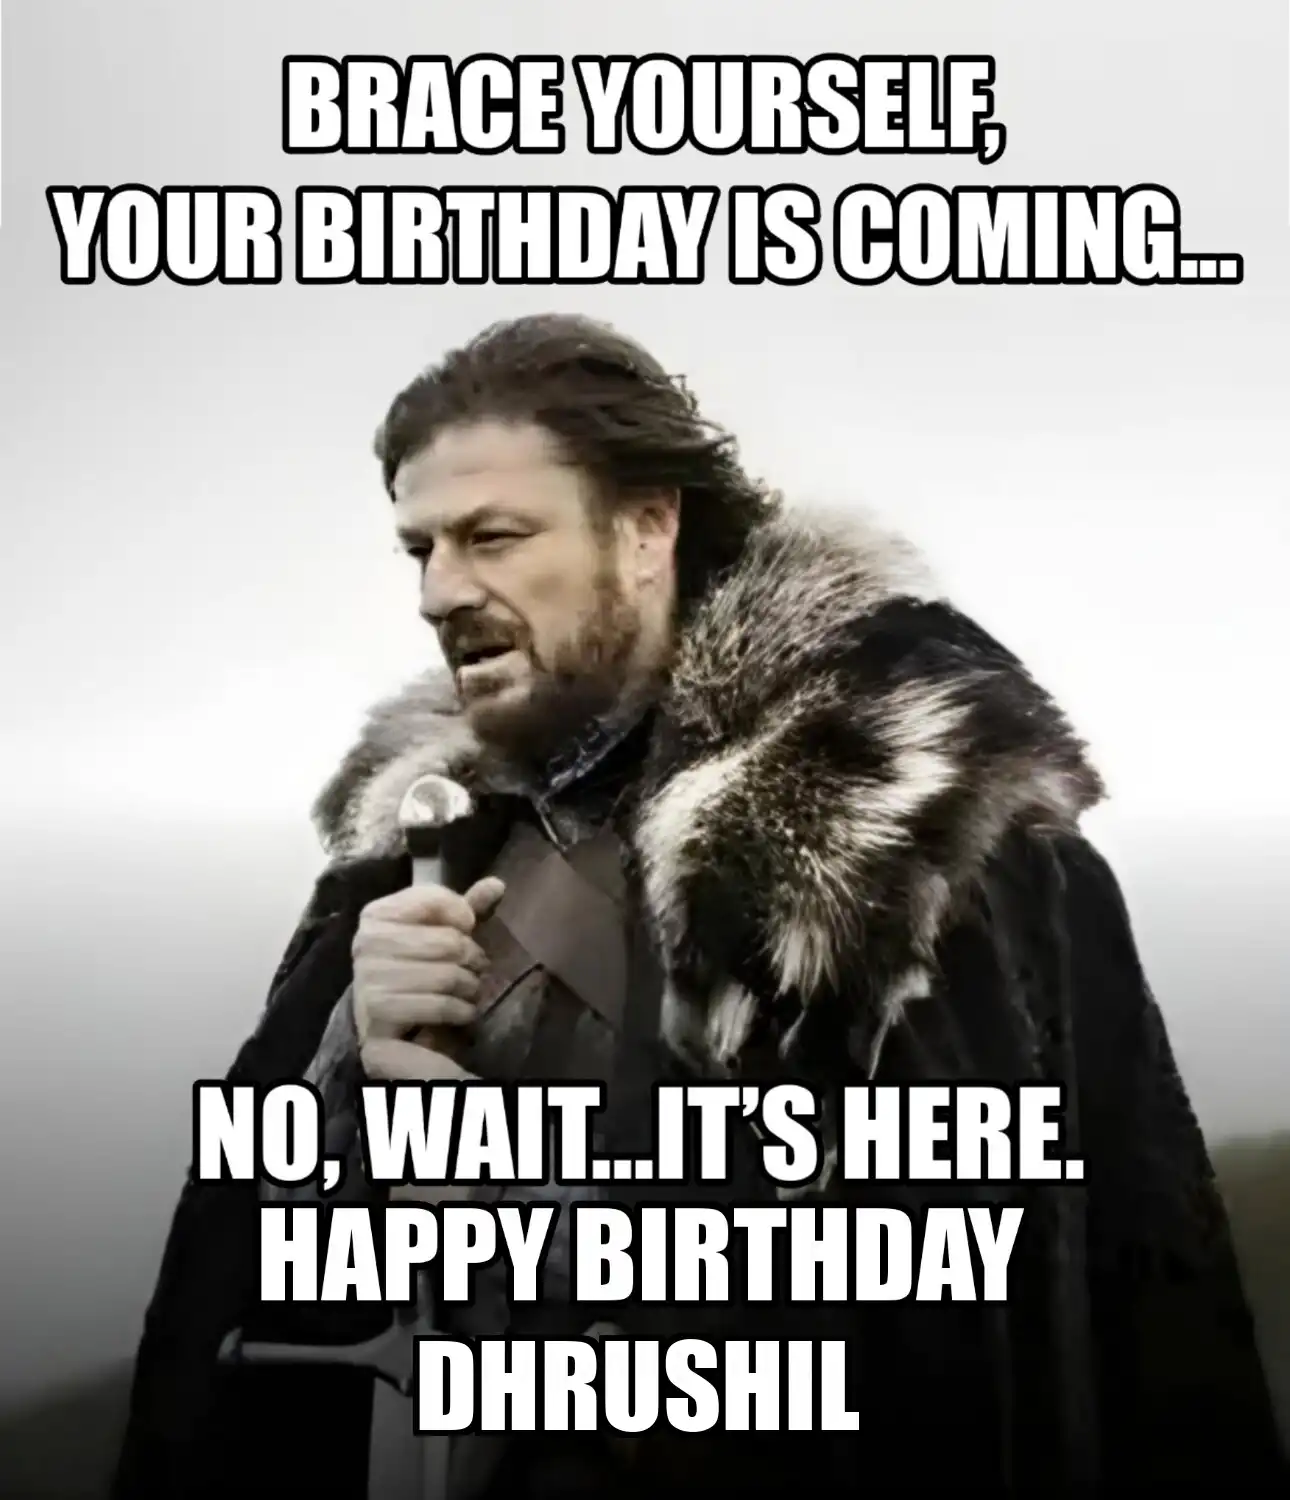 Happy Birthday Dhrushil Brace Yourself Your Birthday Is Coming Meme